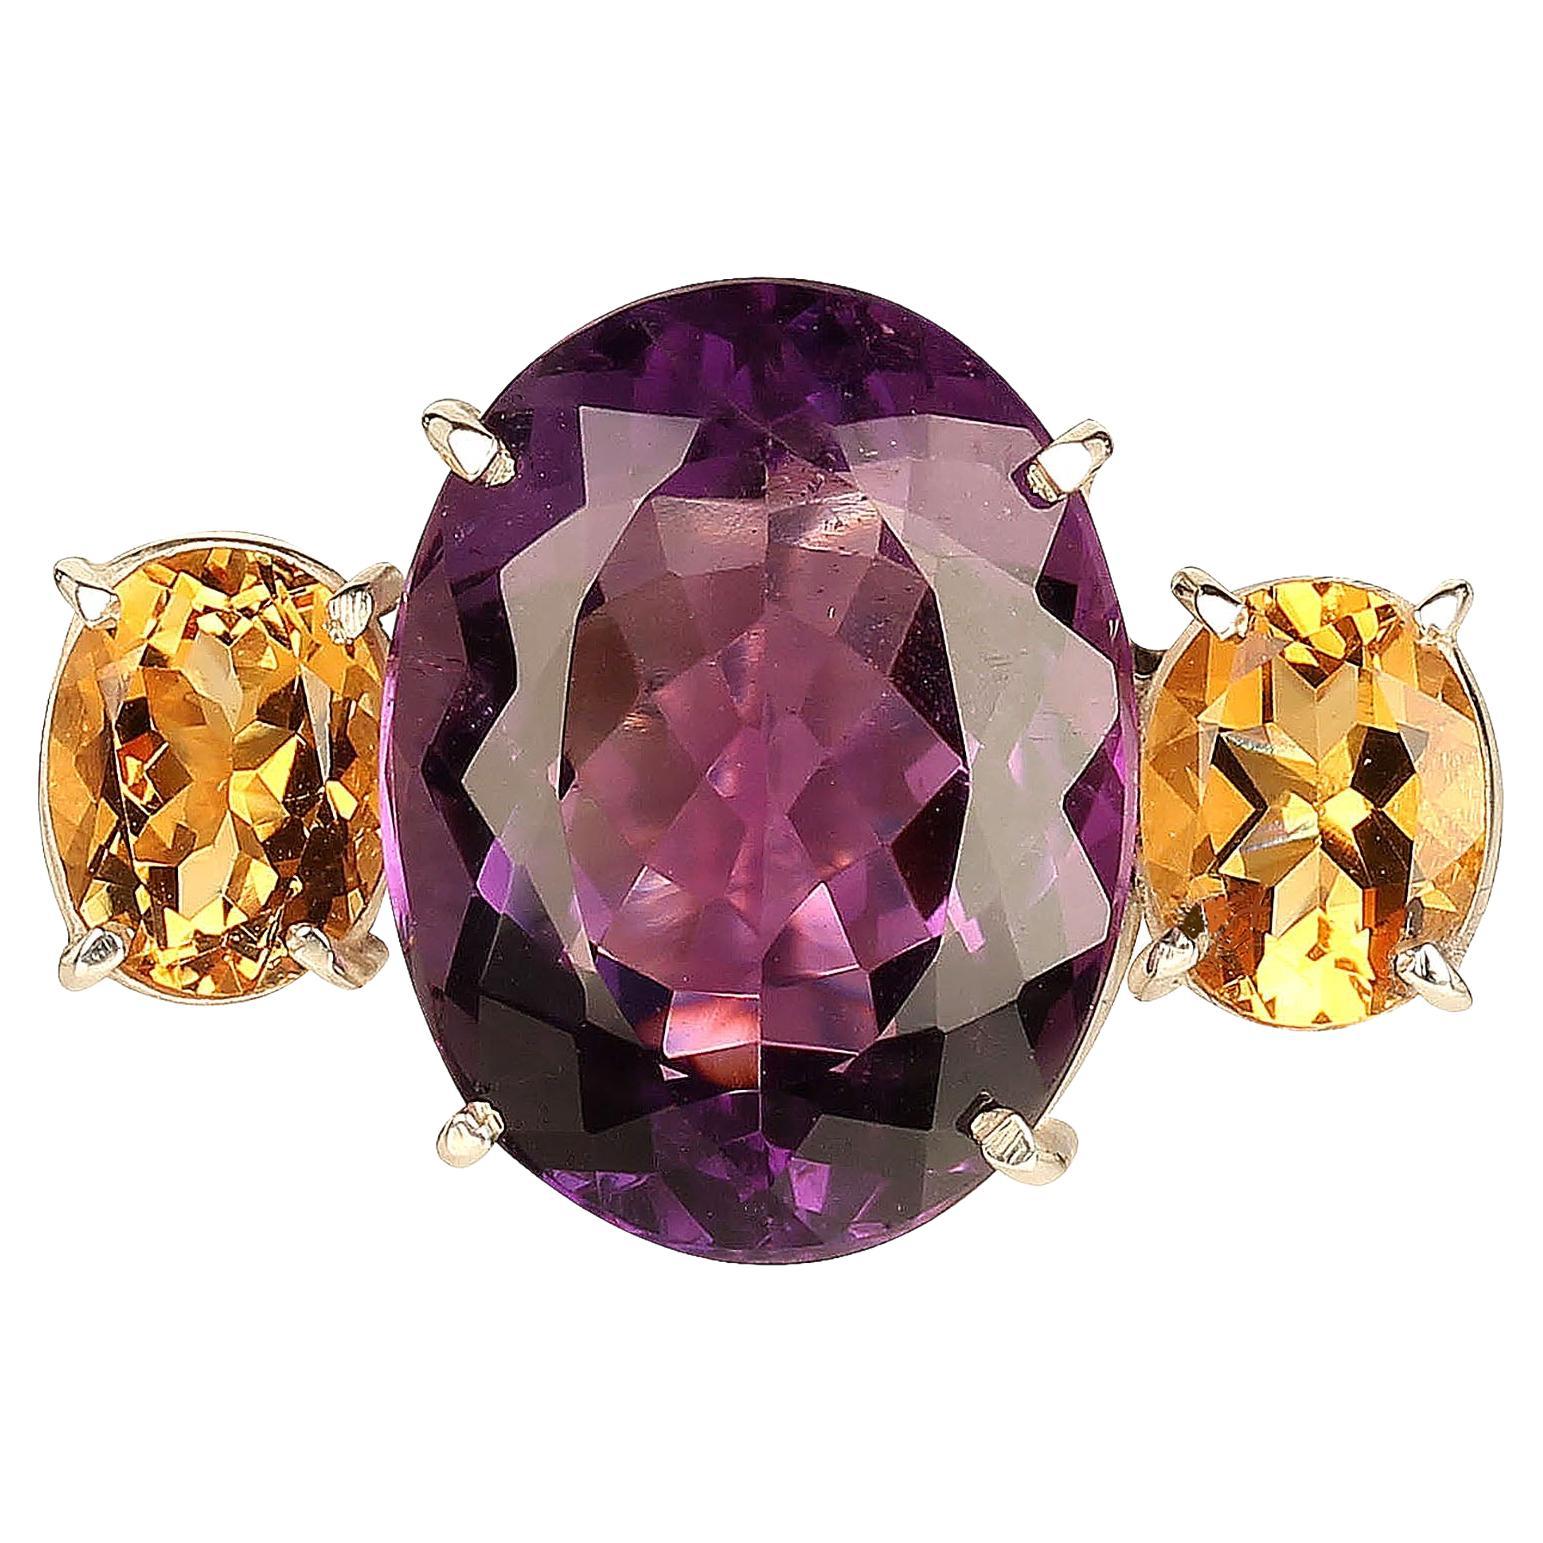 Sparkling oval Amethyst (approximately 18ct) accented with two oval brilliant Citrines in handmade Sterling Silver setting from one of our favorite Brazilian vendors. 
Amethyst is the February birthstone and is said to protect from intoxication and